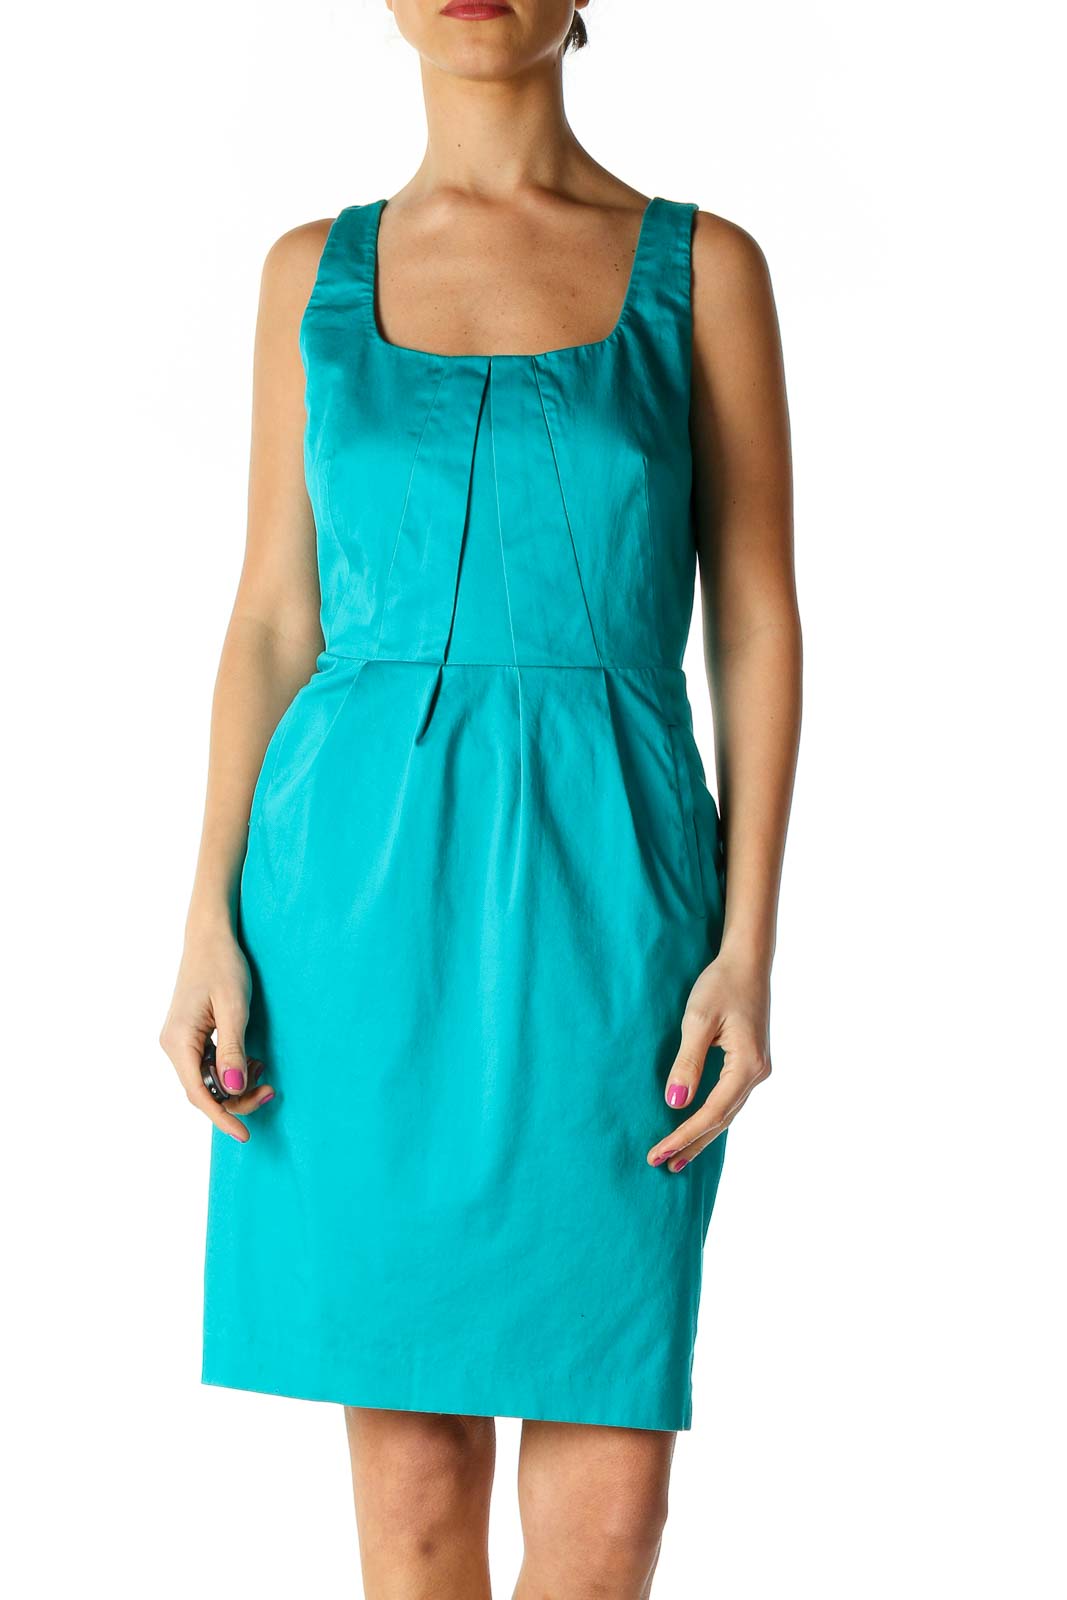 Blue Solid Casual A-Line Dress Front